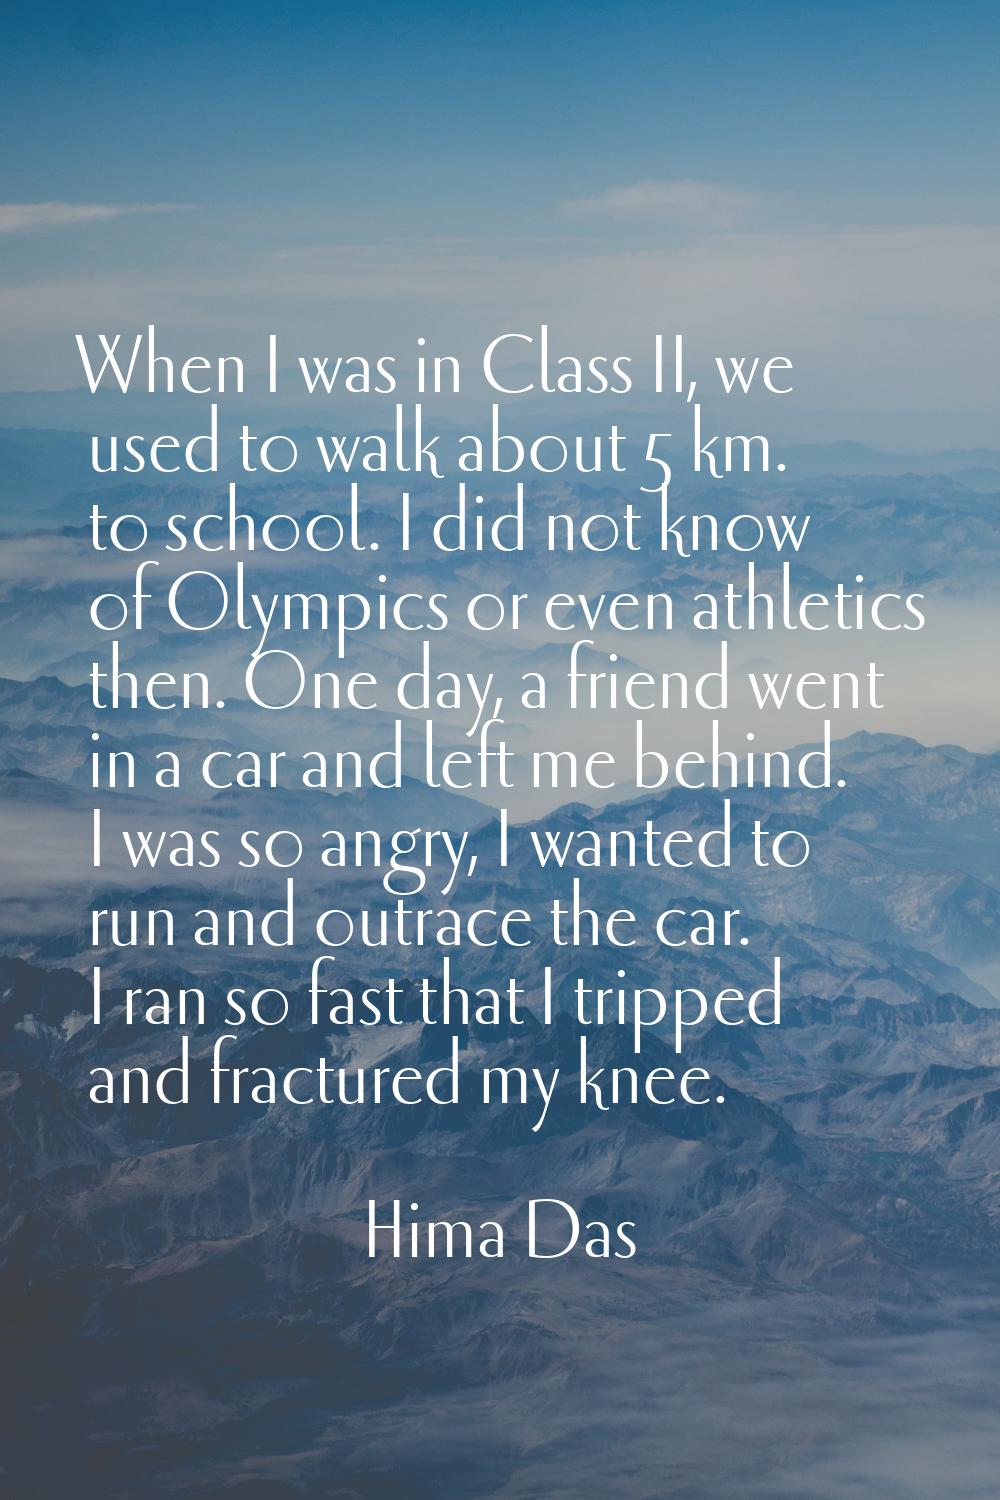 When I was in Class II, we used to walk about 5 km. to school. I did not know of Olympics or even a